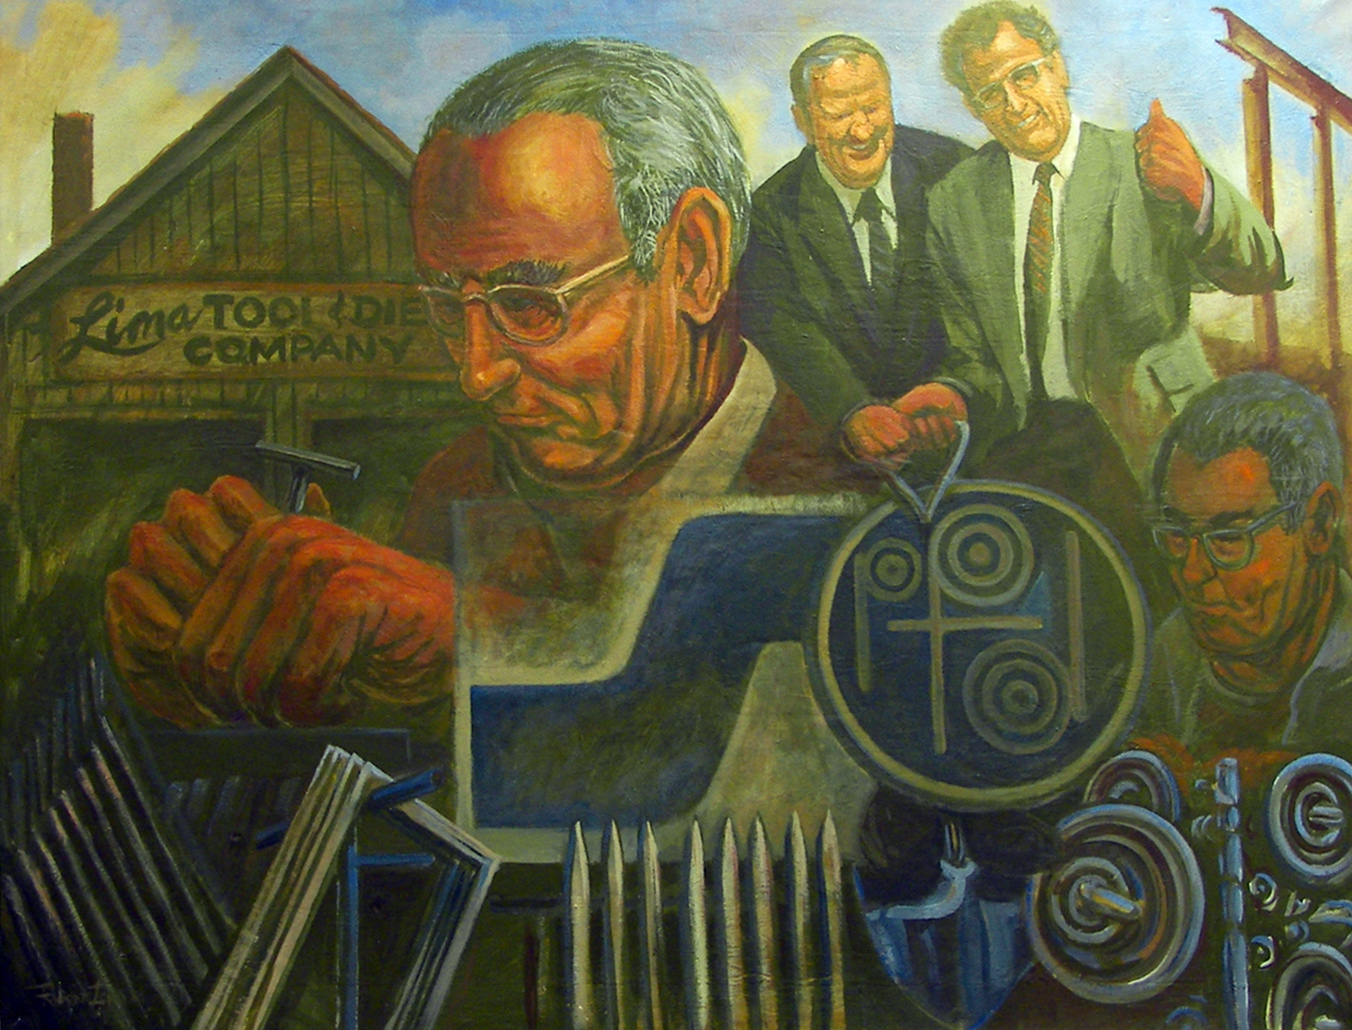 Pictured here is an old-fashioned painting of our founders portraying the growth of the company through history